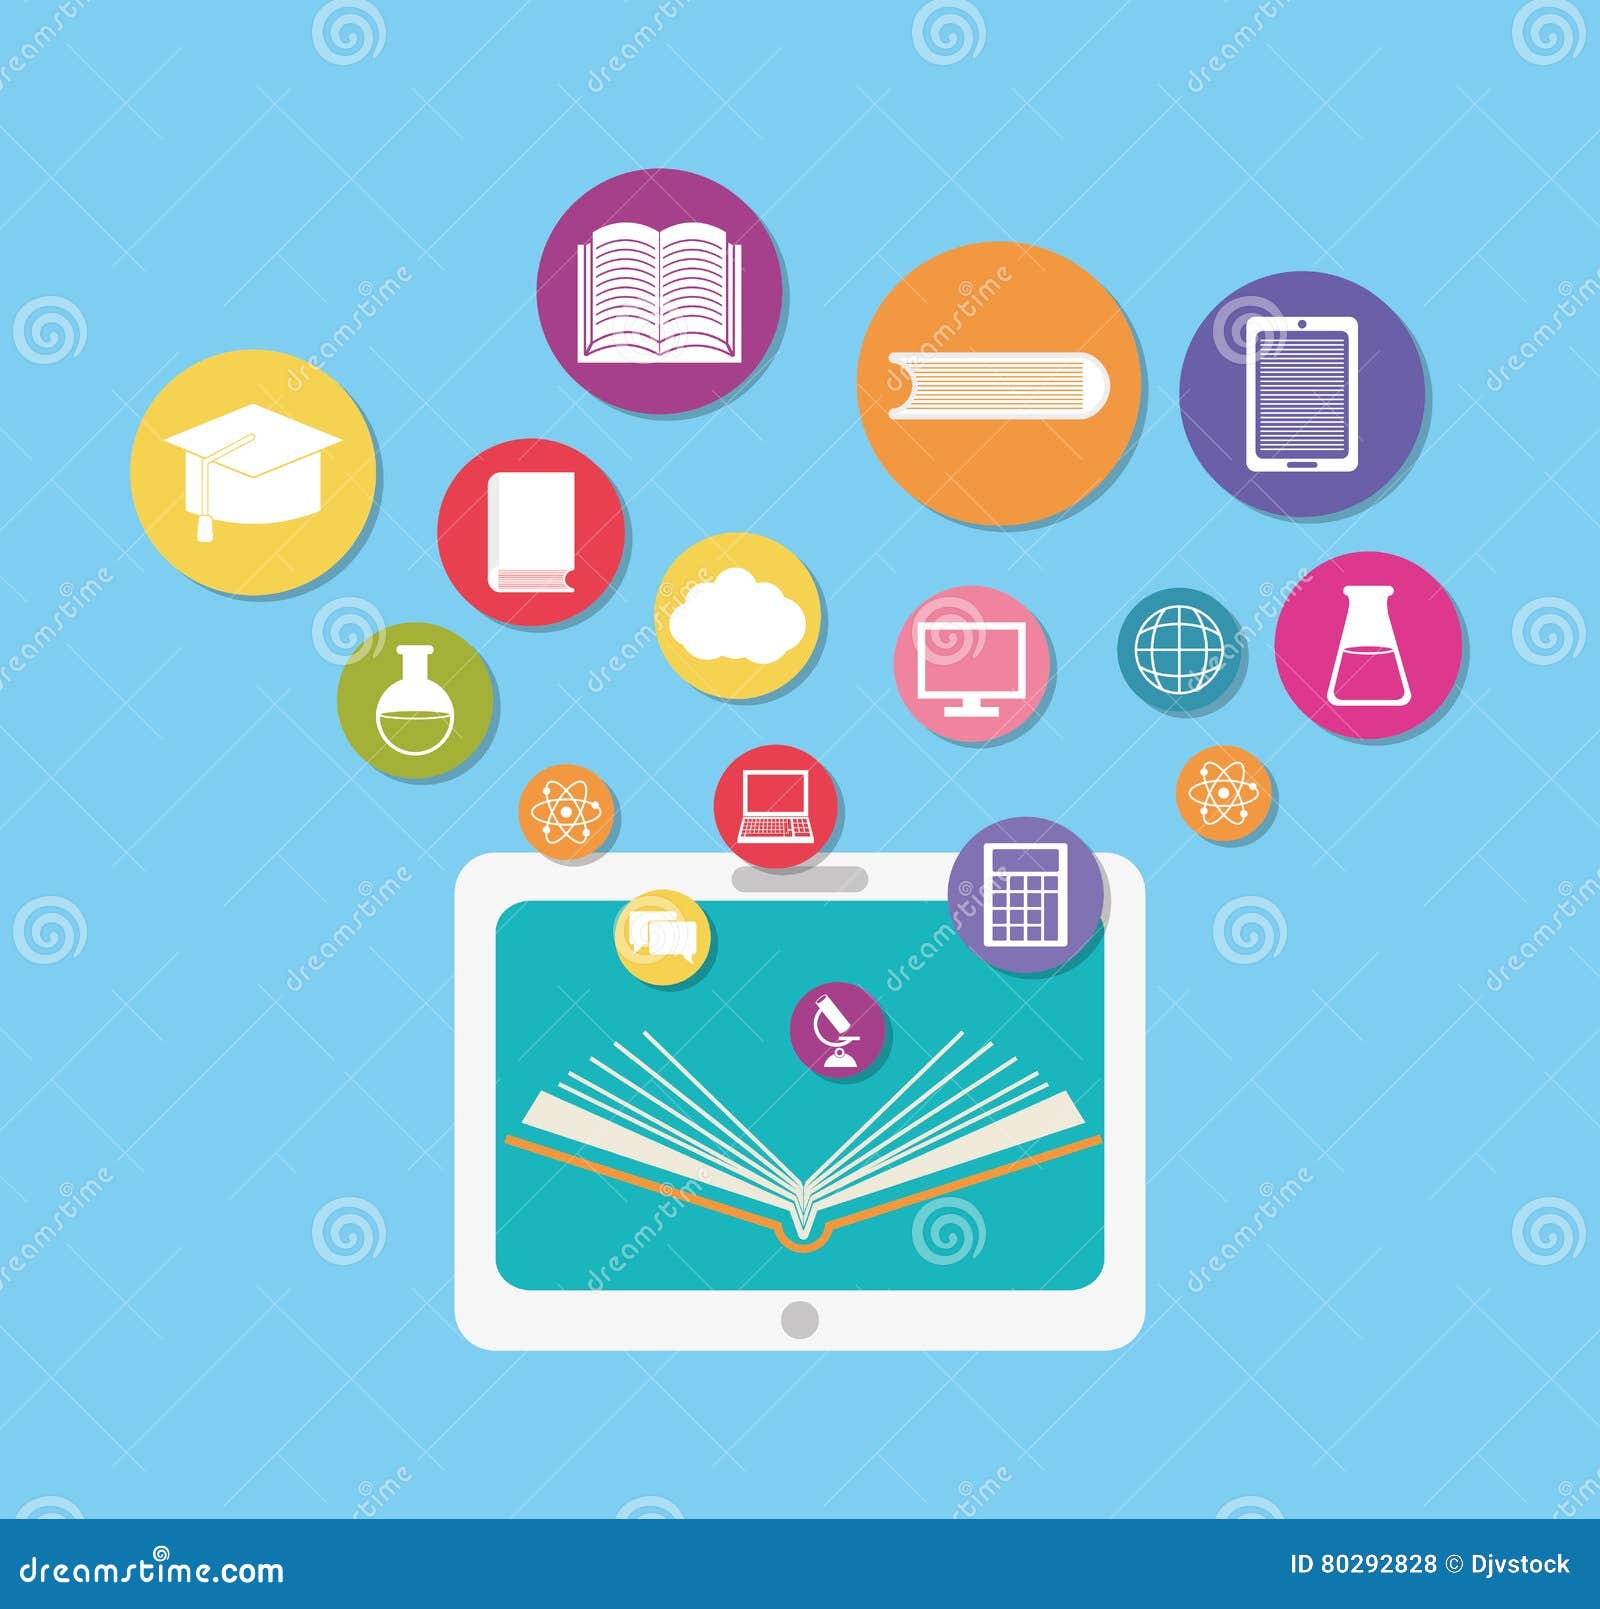 Elearning Online Education And Knowledge Symbols Cartoon Vector